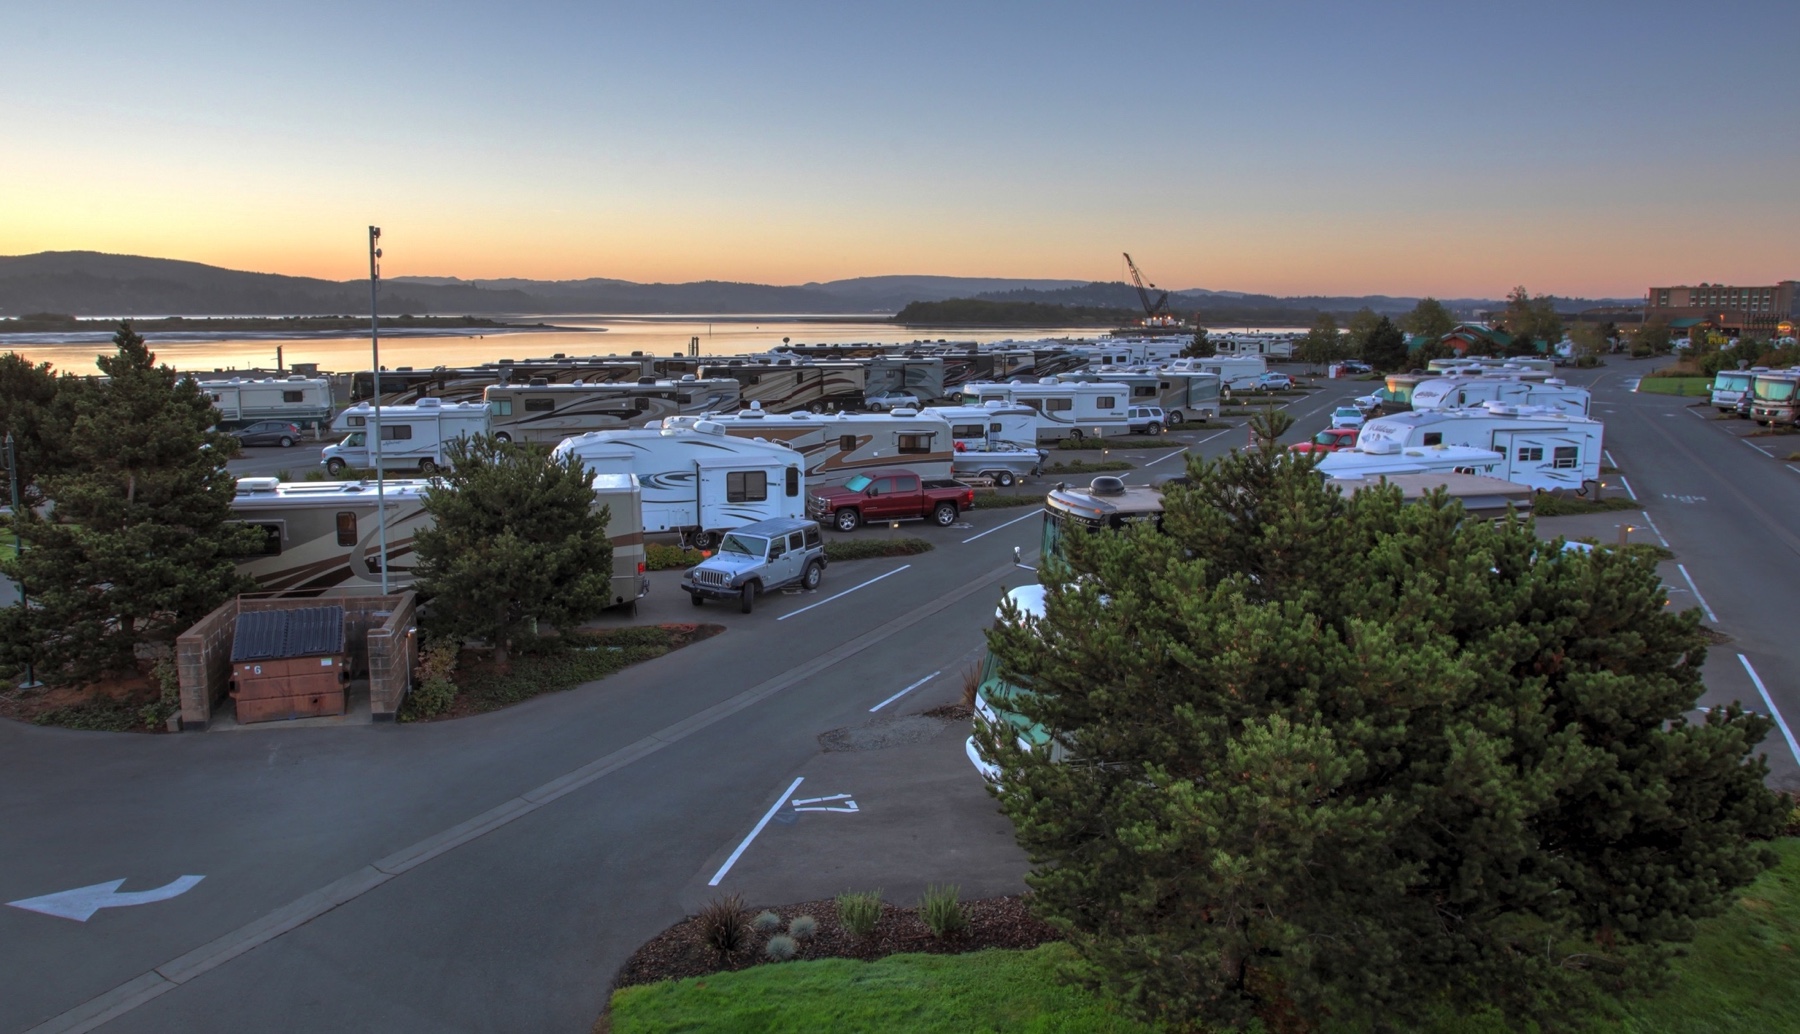 Sunset over The Mill's RV park